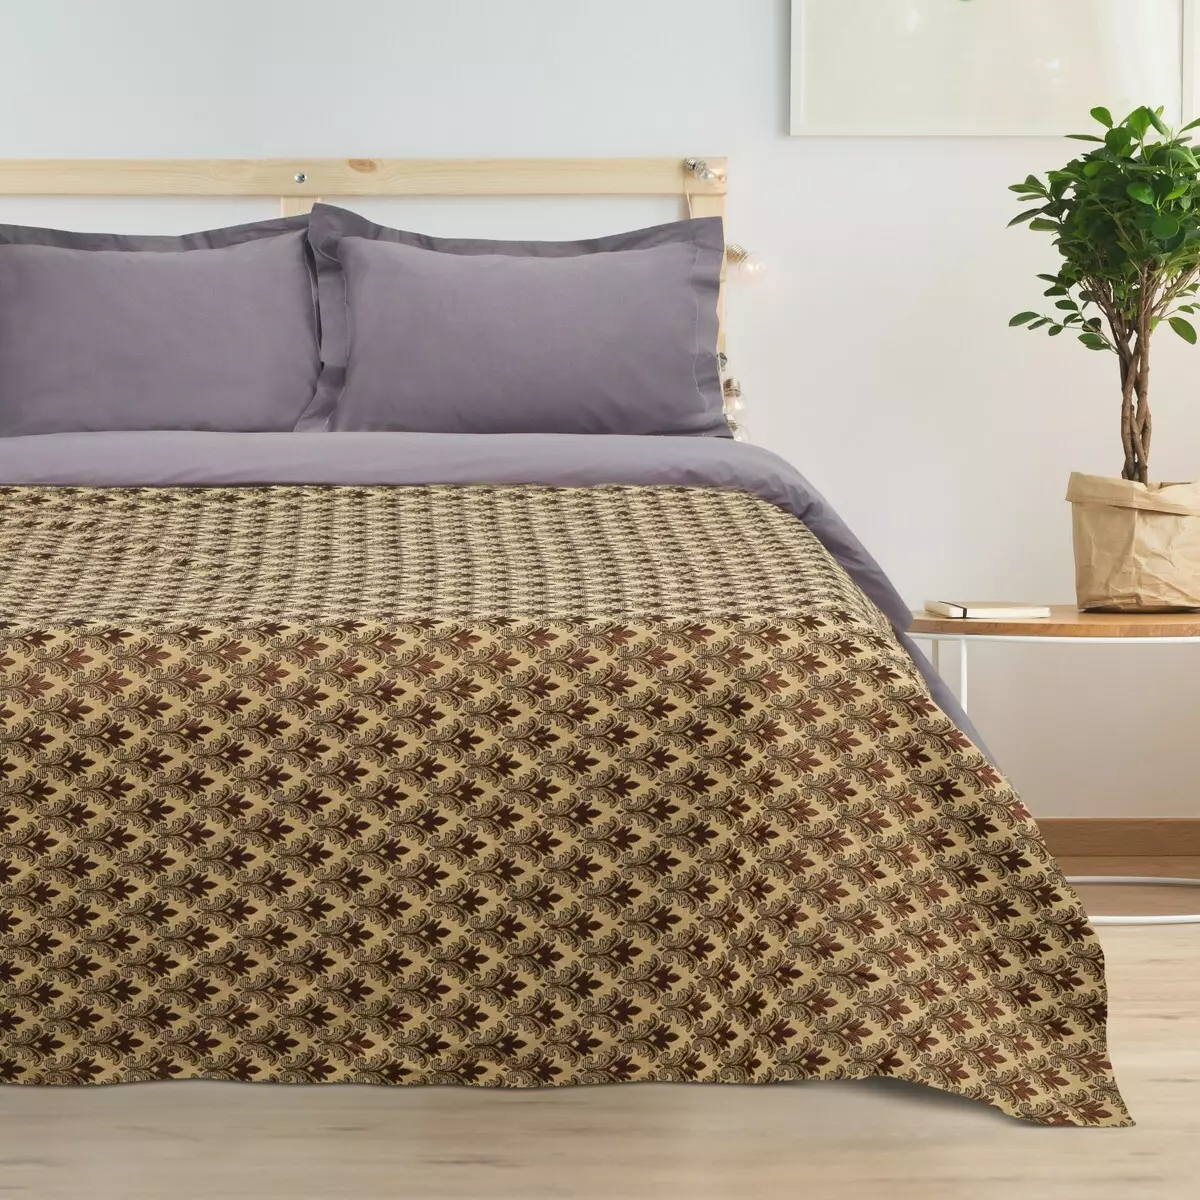 Tapestry bedspreads (37 عکس): په بستره 220x240 او نورو اندازو jacquard bedspreads، د ټوکر د جوړښت ته gost، monophonic او نورو bedspreads له مخې 24933_11